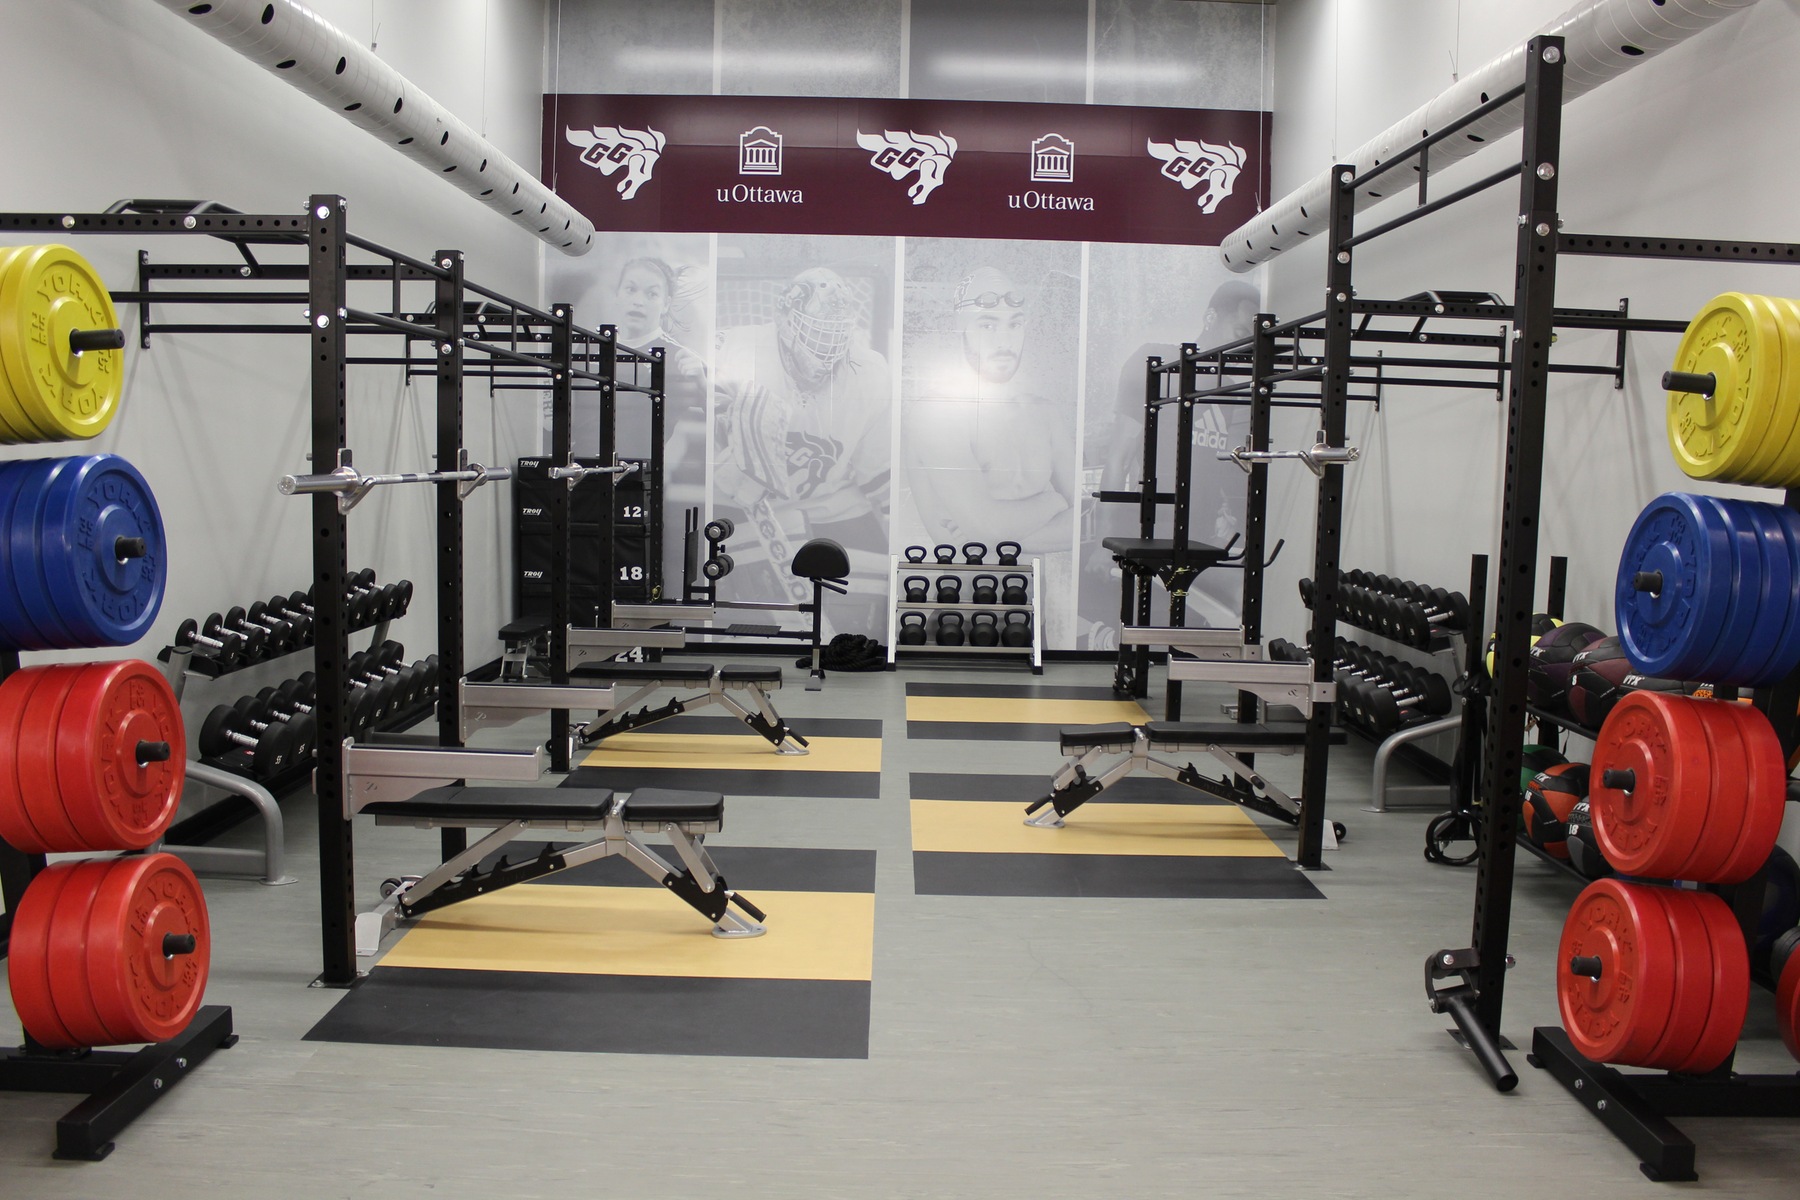 View of room in High Performance Centre with equipment.